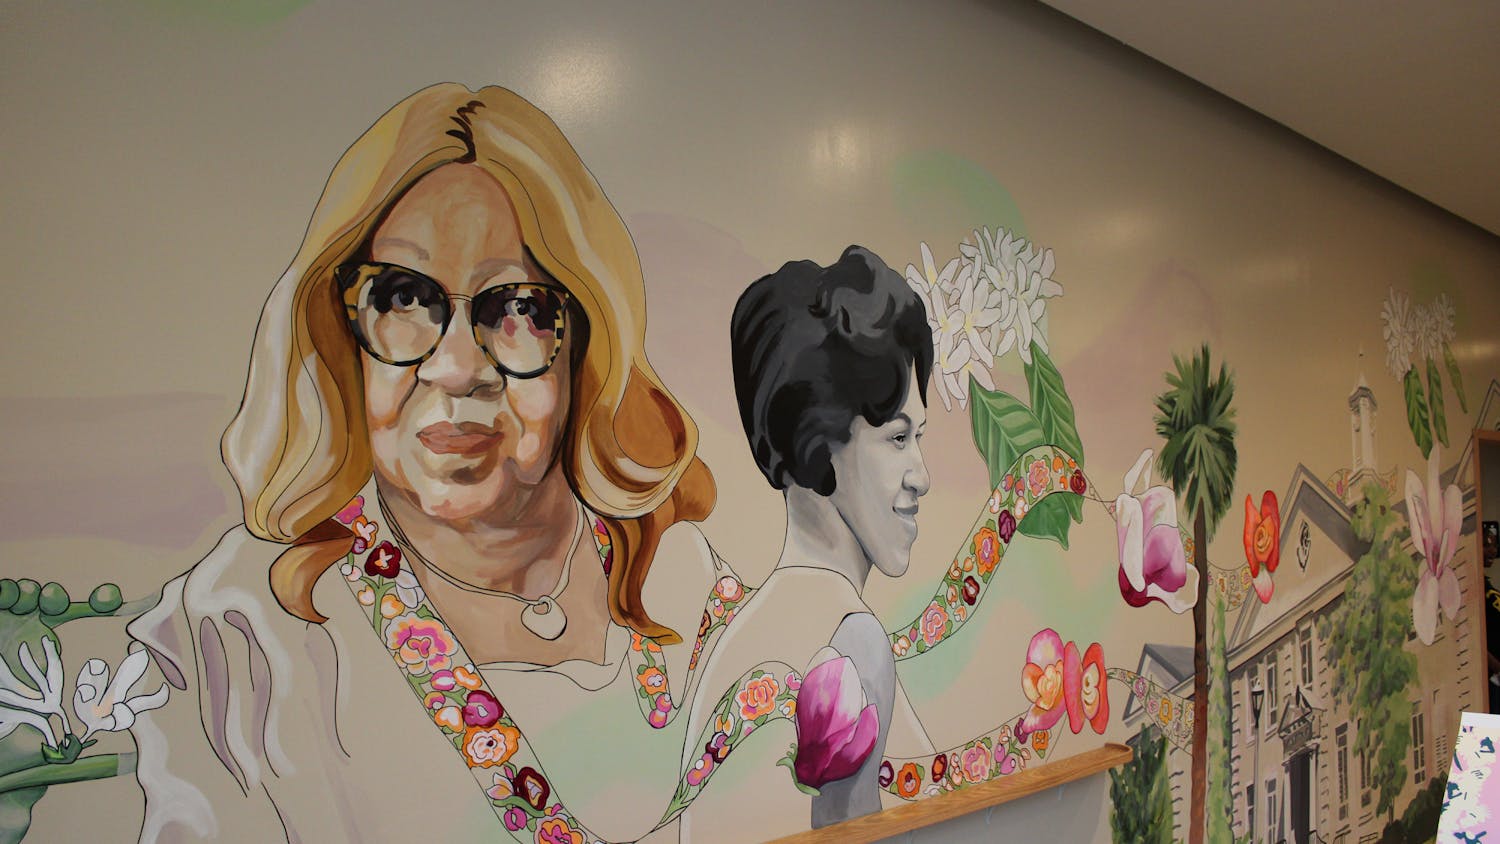 The inside of the 650 Lincoln St. Starbucks on March 11, 2023. The Starbucks mural is dedicated to the first Black female student at USC, Henrie Monteith Treadwell.